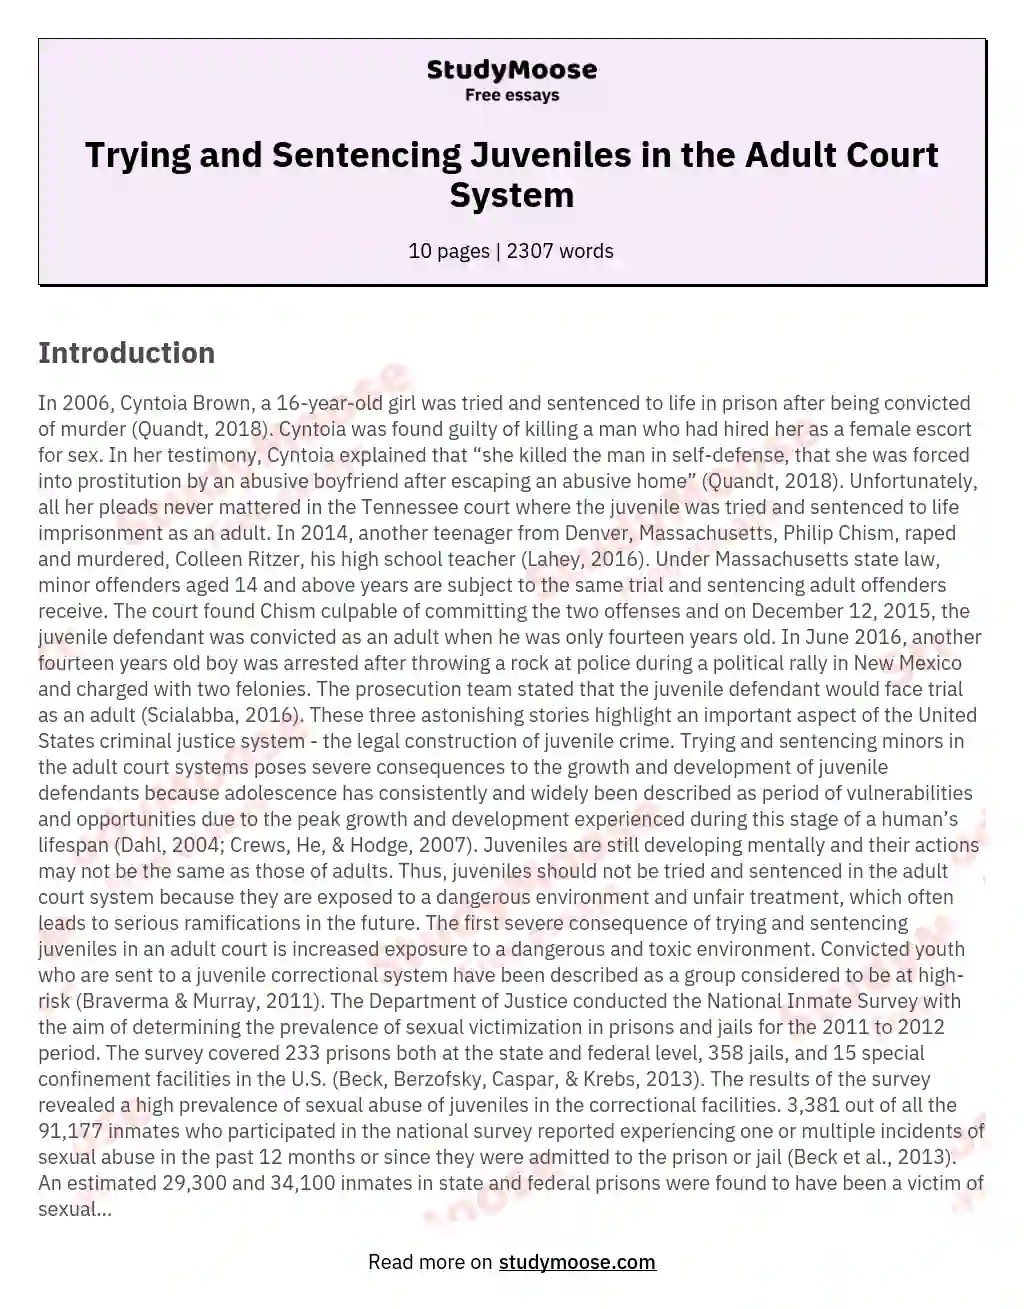 Trying and Sentencing Juveniles in the Adult Court System essay